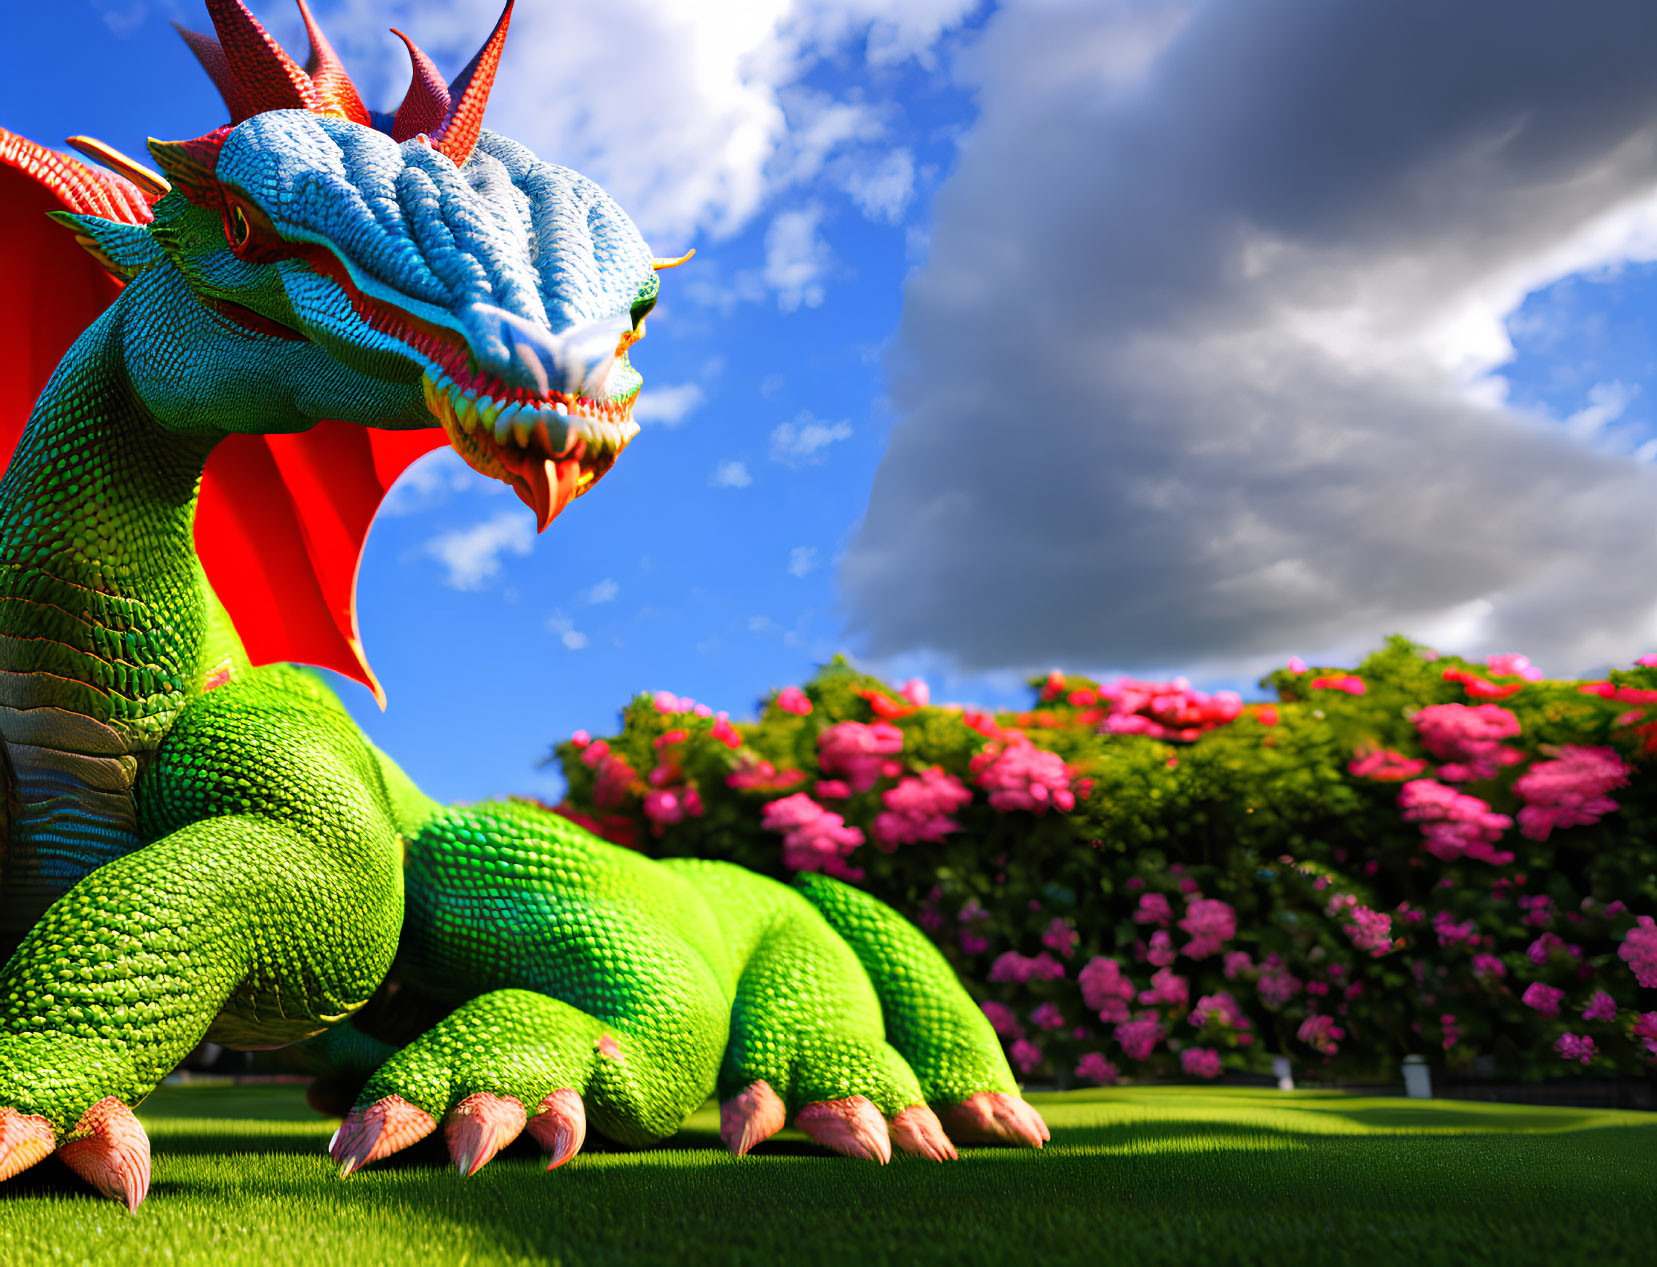 Colorful Dragon with Red Wings in Sunny Garden